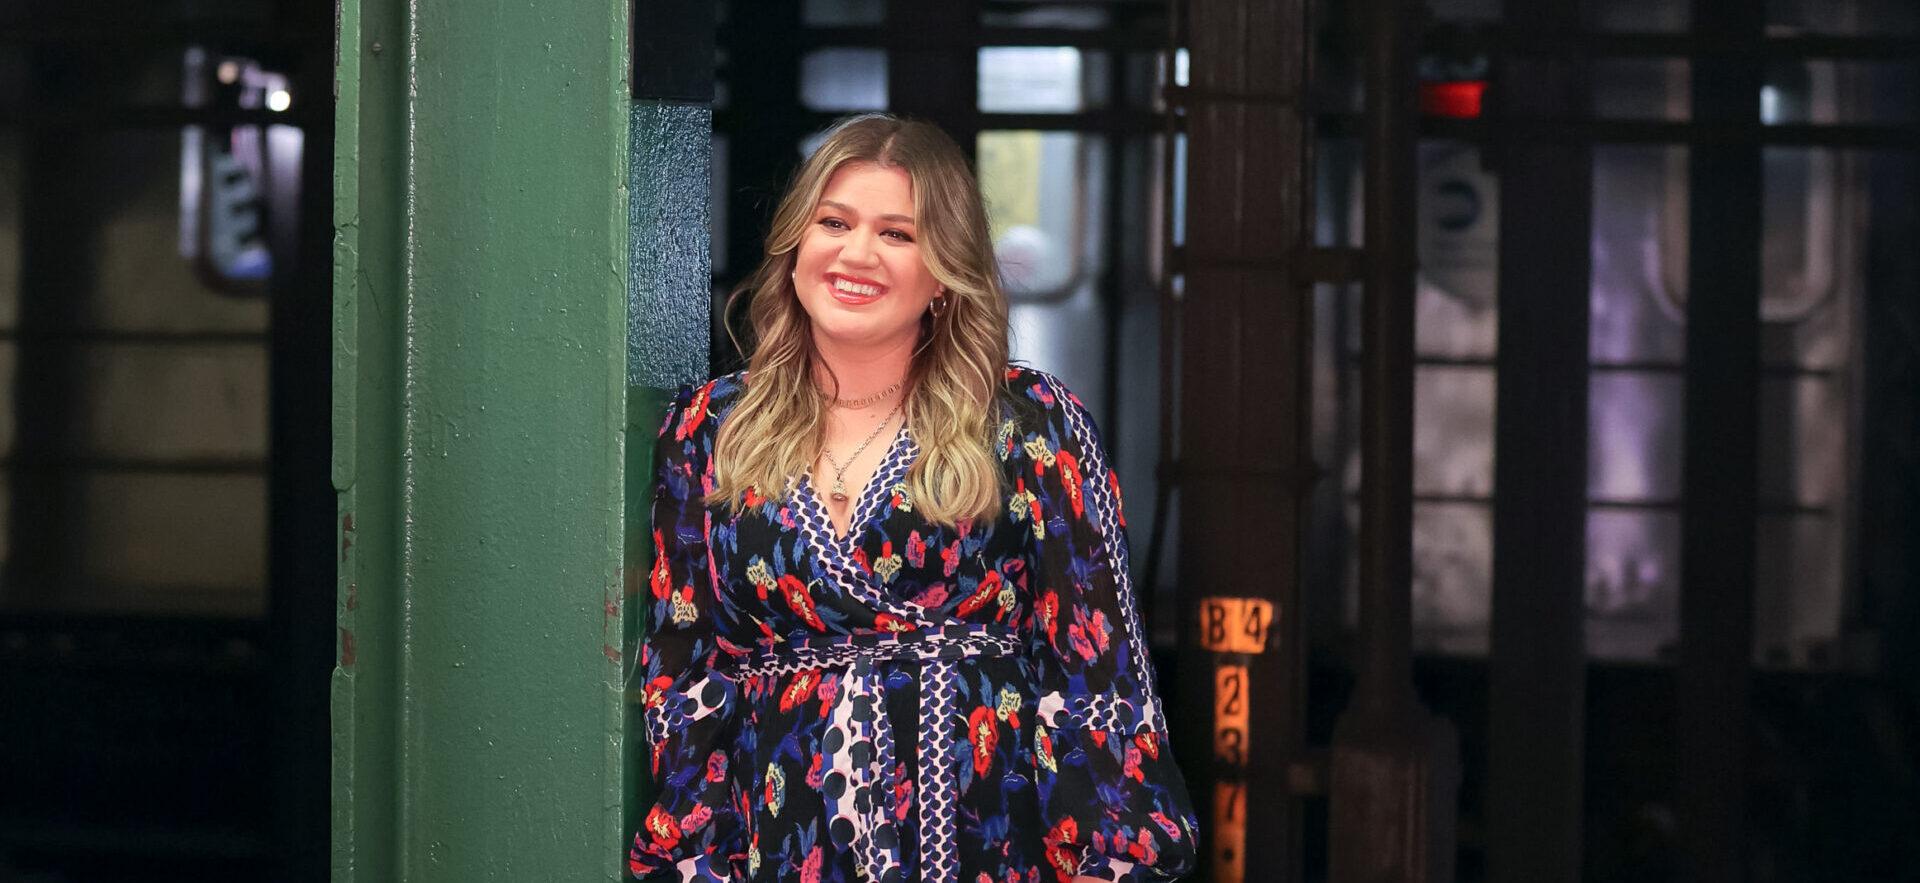 Fans Respond To Kelly Clarkson’s Statement Regarding ‘The Kelly Clarkson Show’ Workplace Allegations